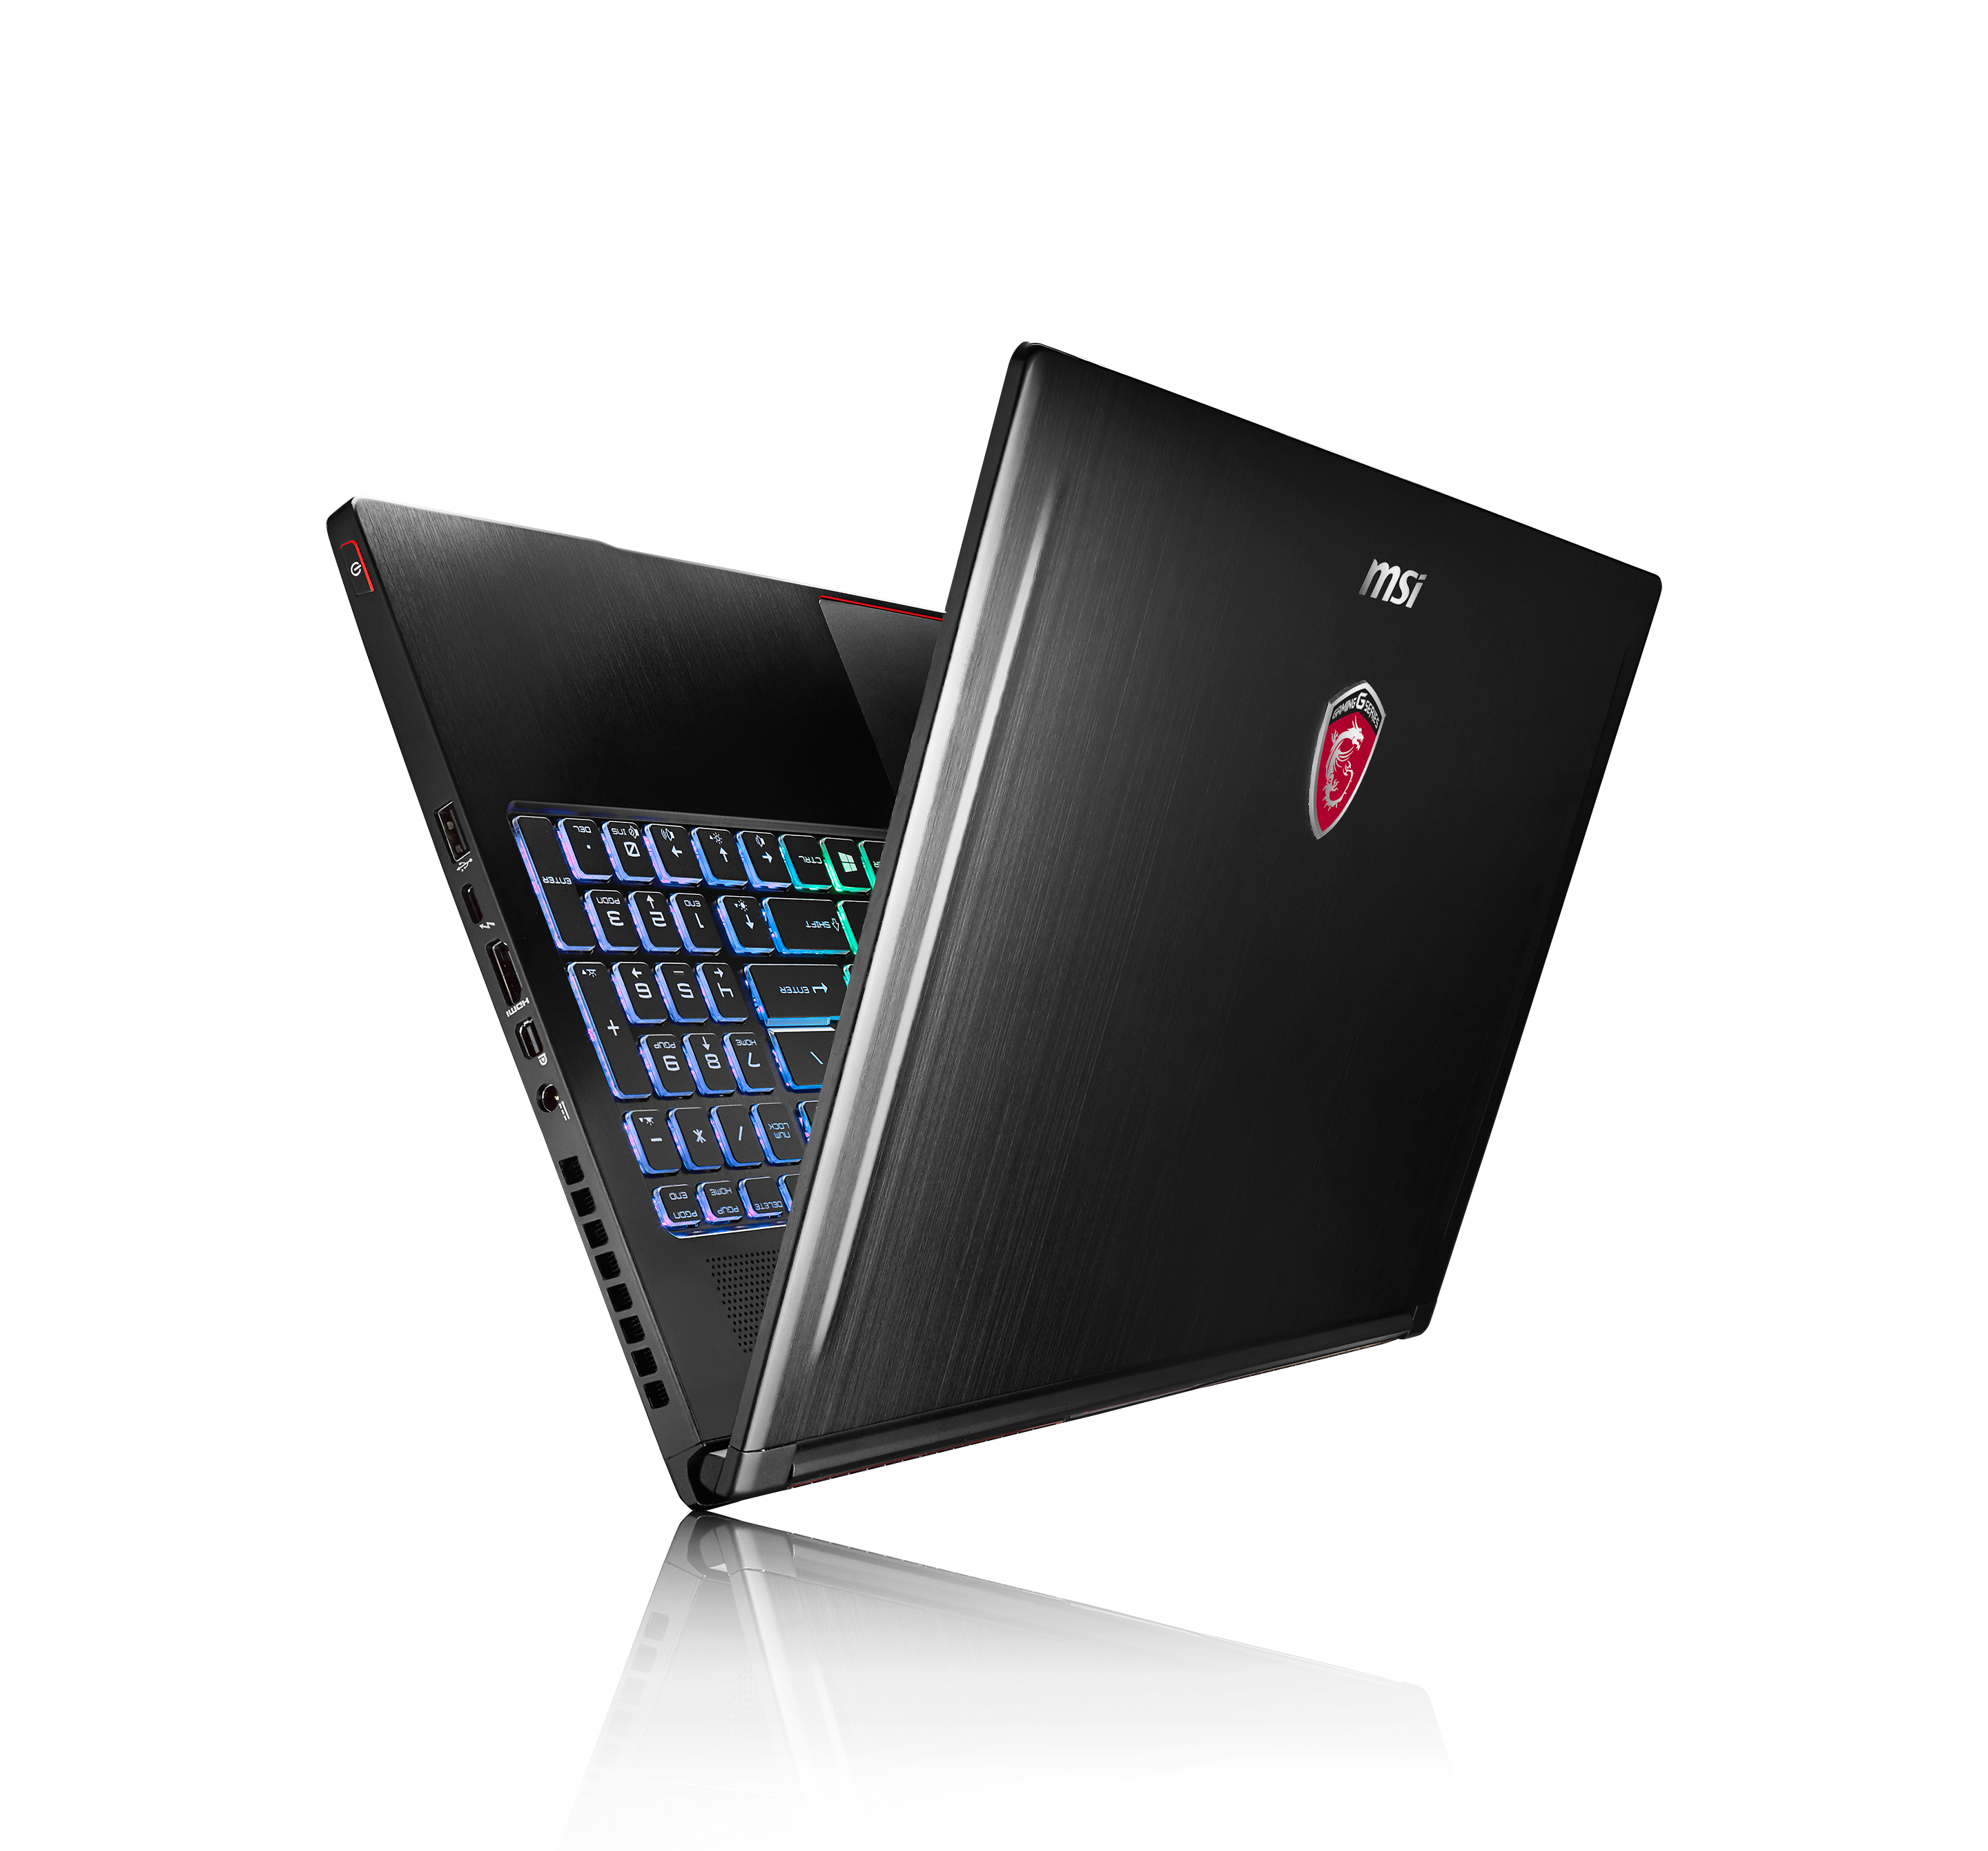 The Thinnest High Performance Gaming Notebook